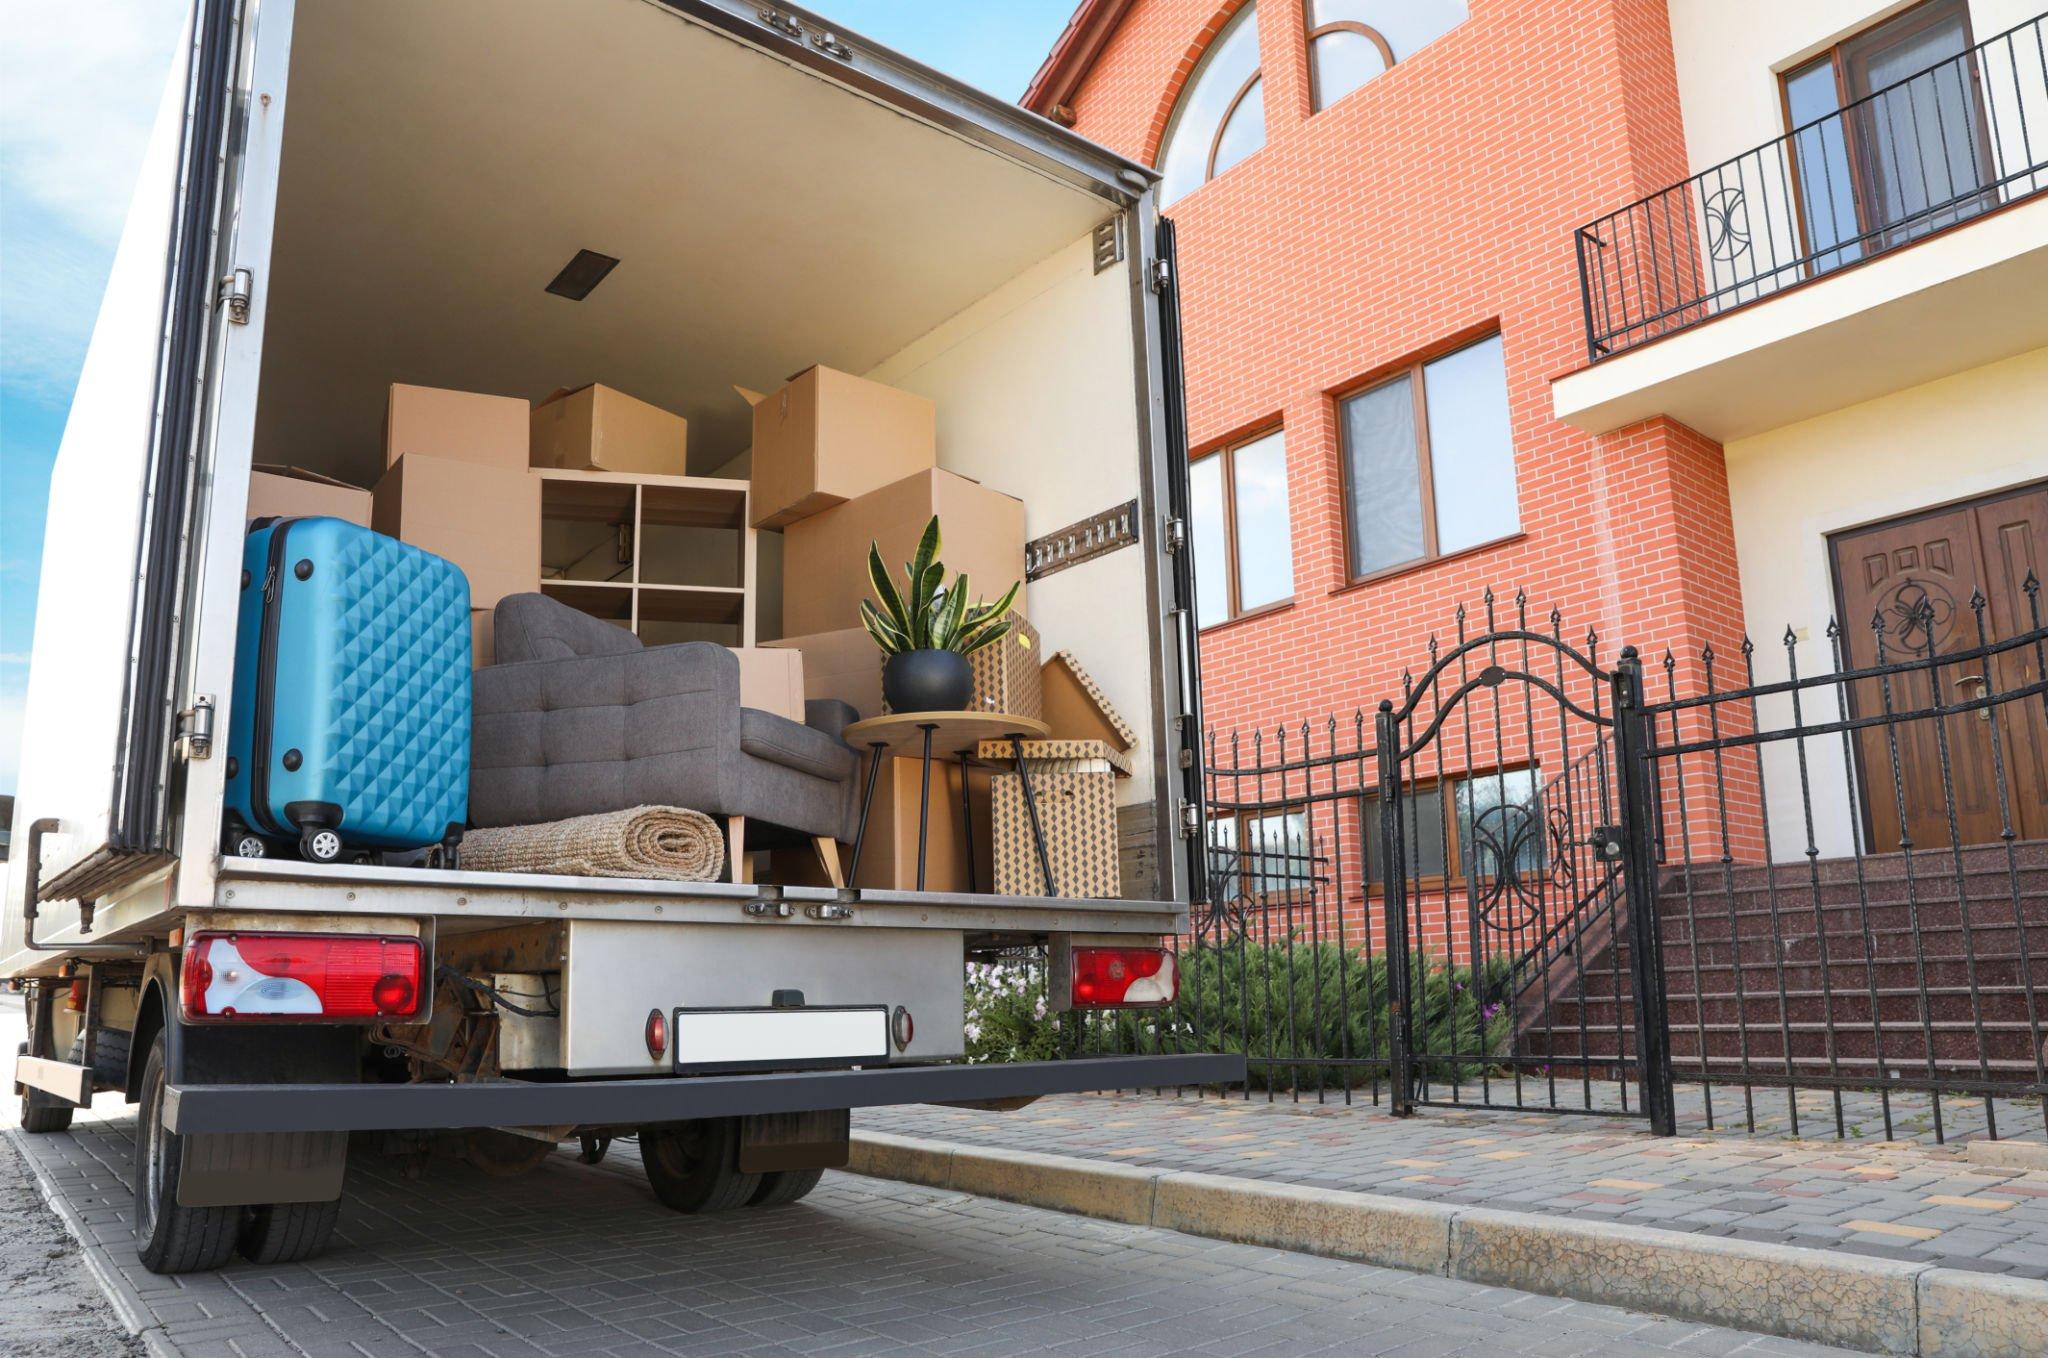 Factors of consideration when moving to a new country